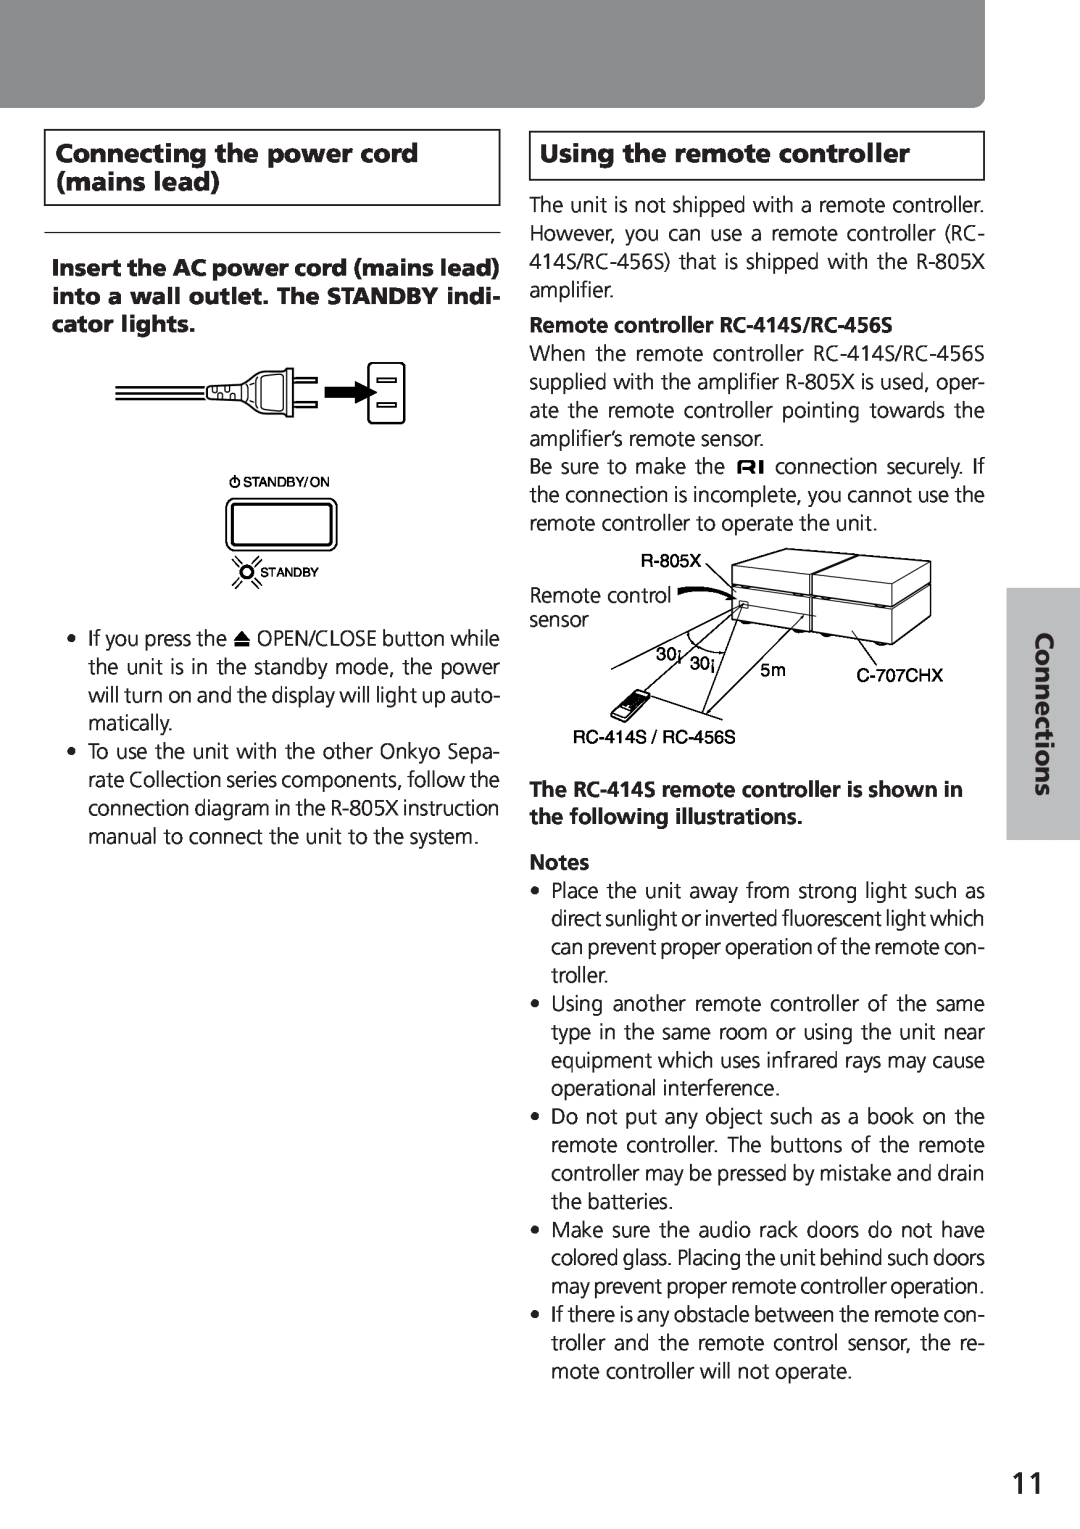 Onkyo C-707CHX instruction manual Connecting the power cord mains lead, Using the remote controller, Connections 